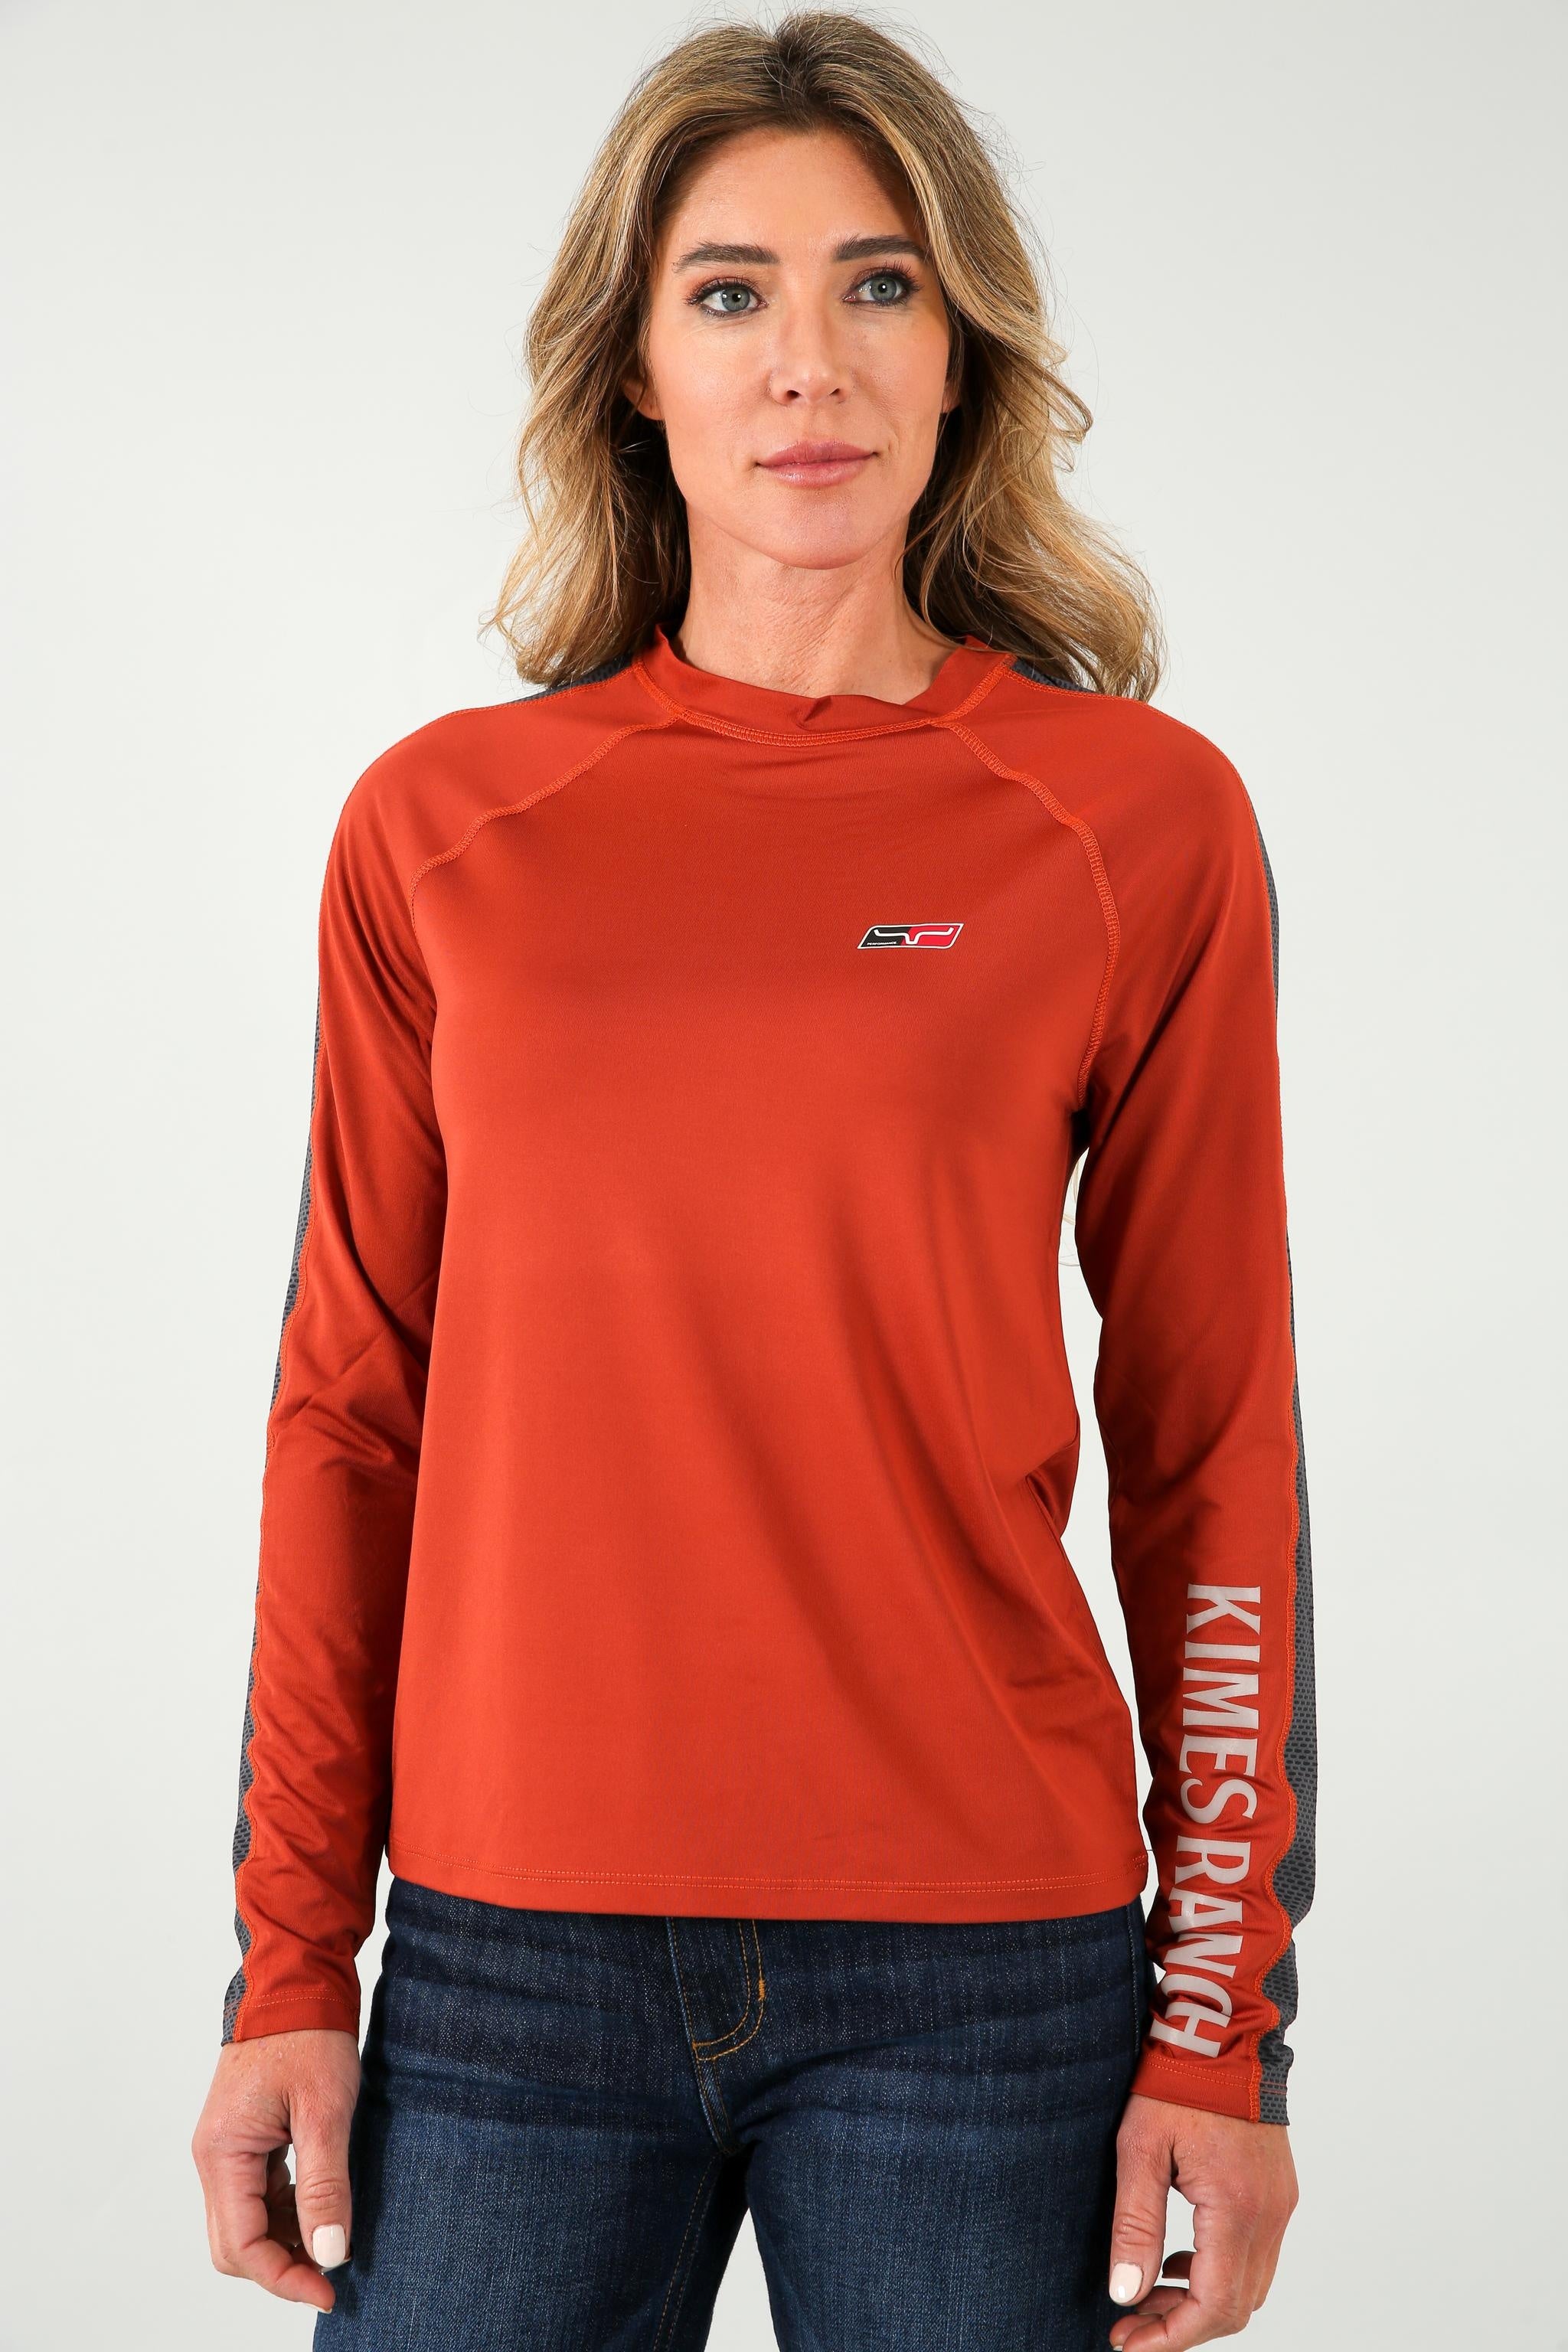 Square Neck Long Sleeve T-shirt In Cocoa